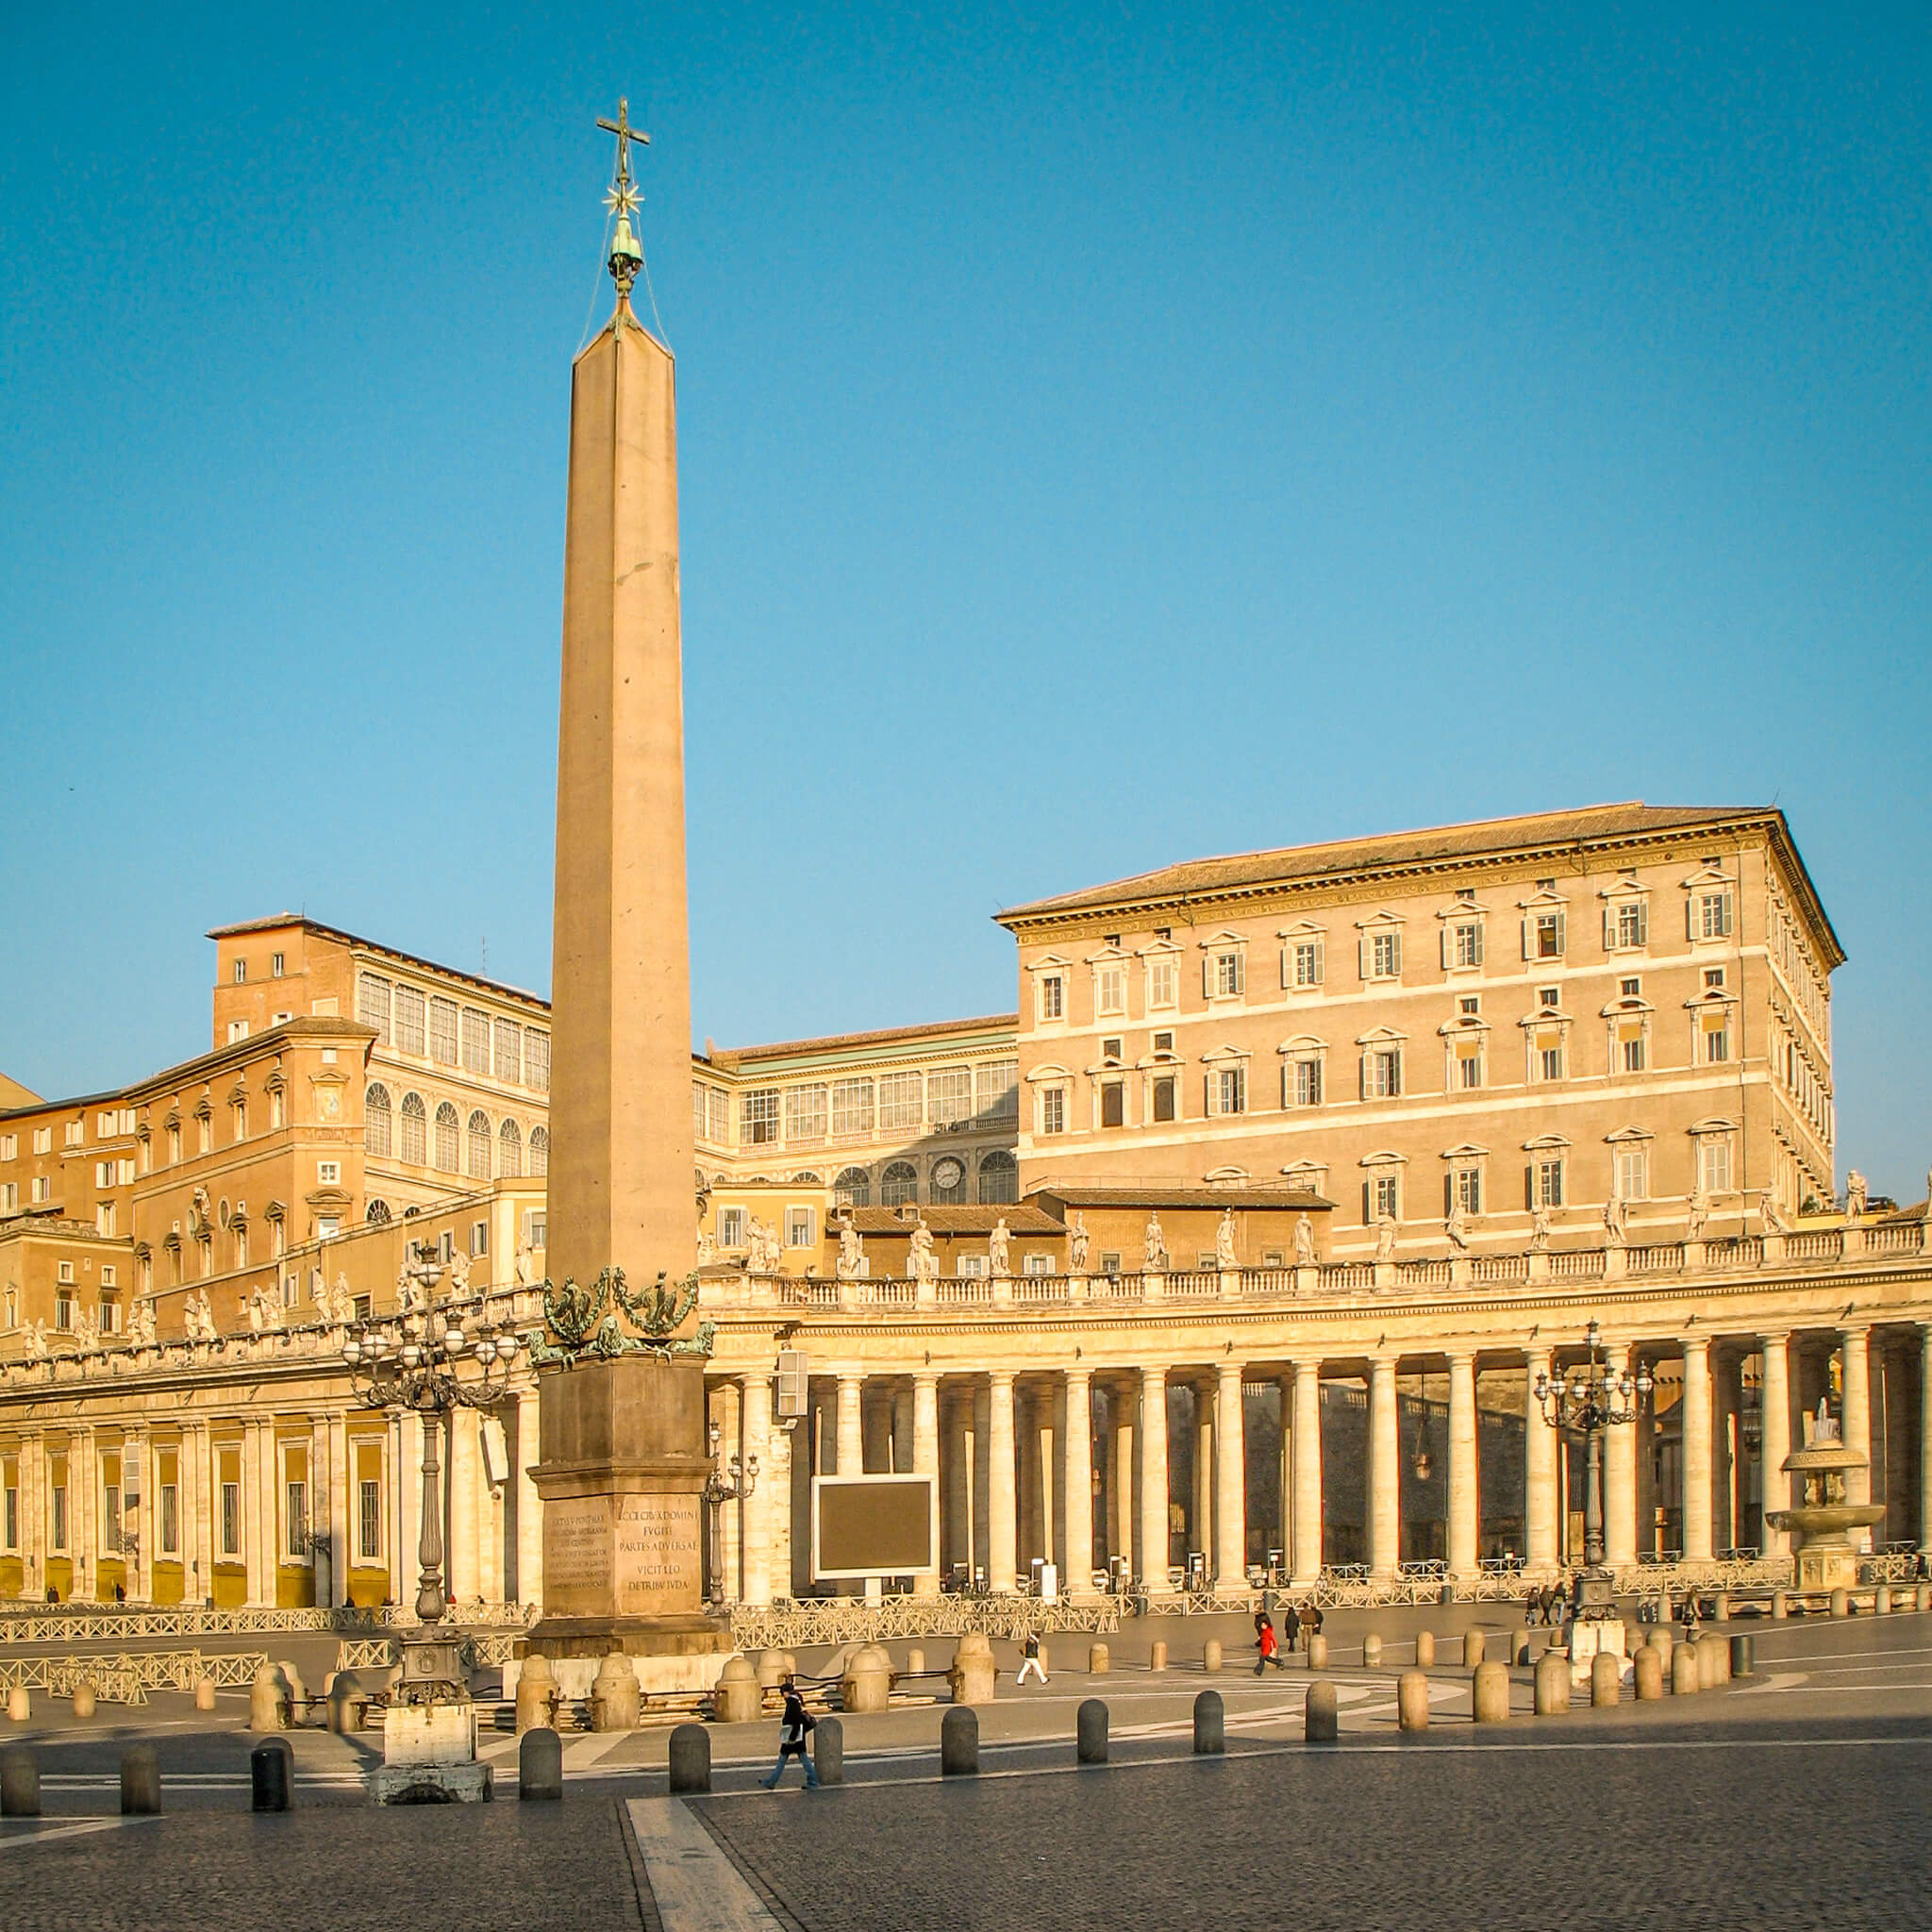 Saint Peter's Square and the Vatican Obelisk